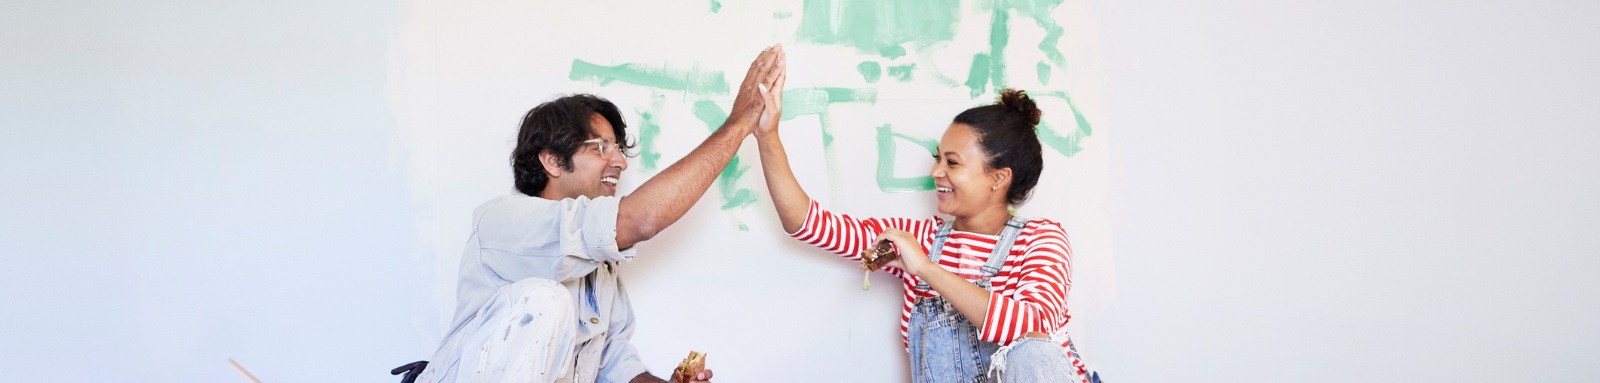 Man and woman high fiving each other during home renovation